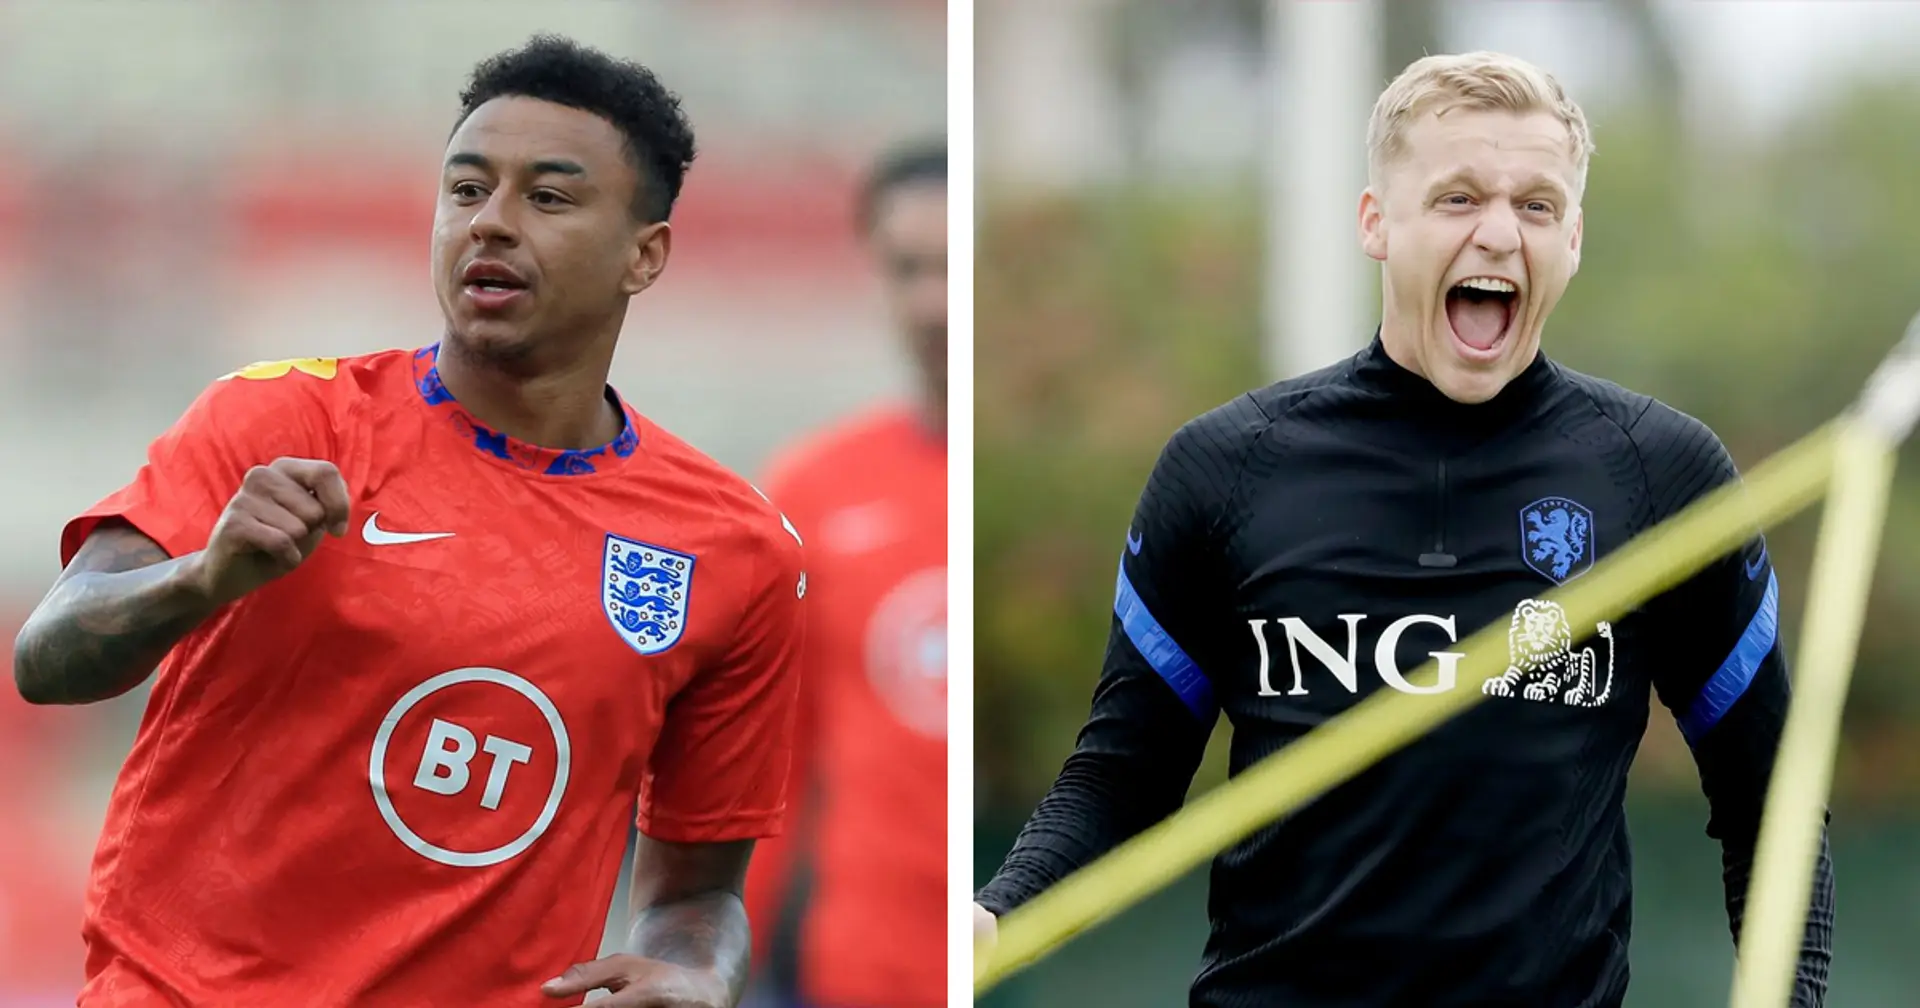 Win for Lingard, disappointment for Van de Beek and more: international round-up